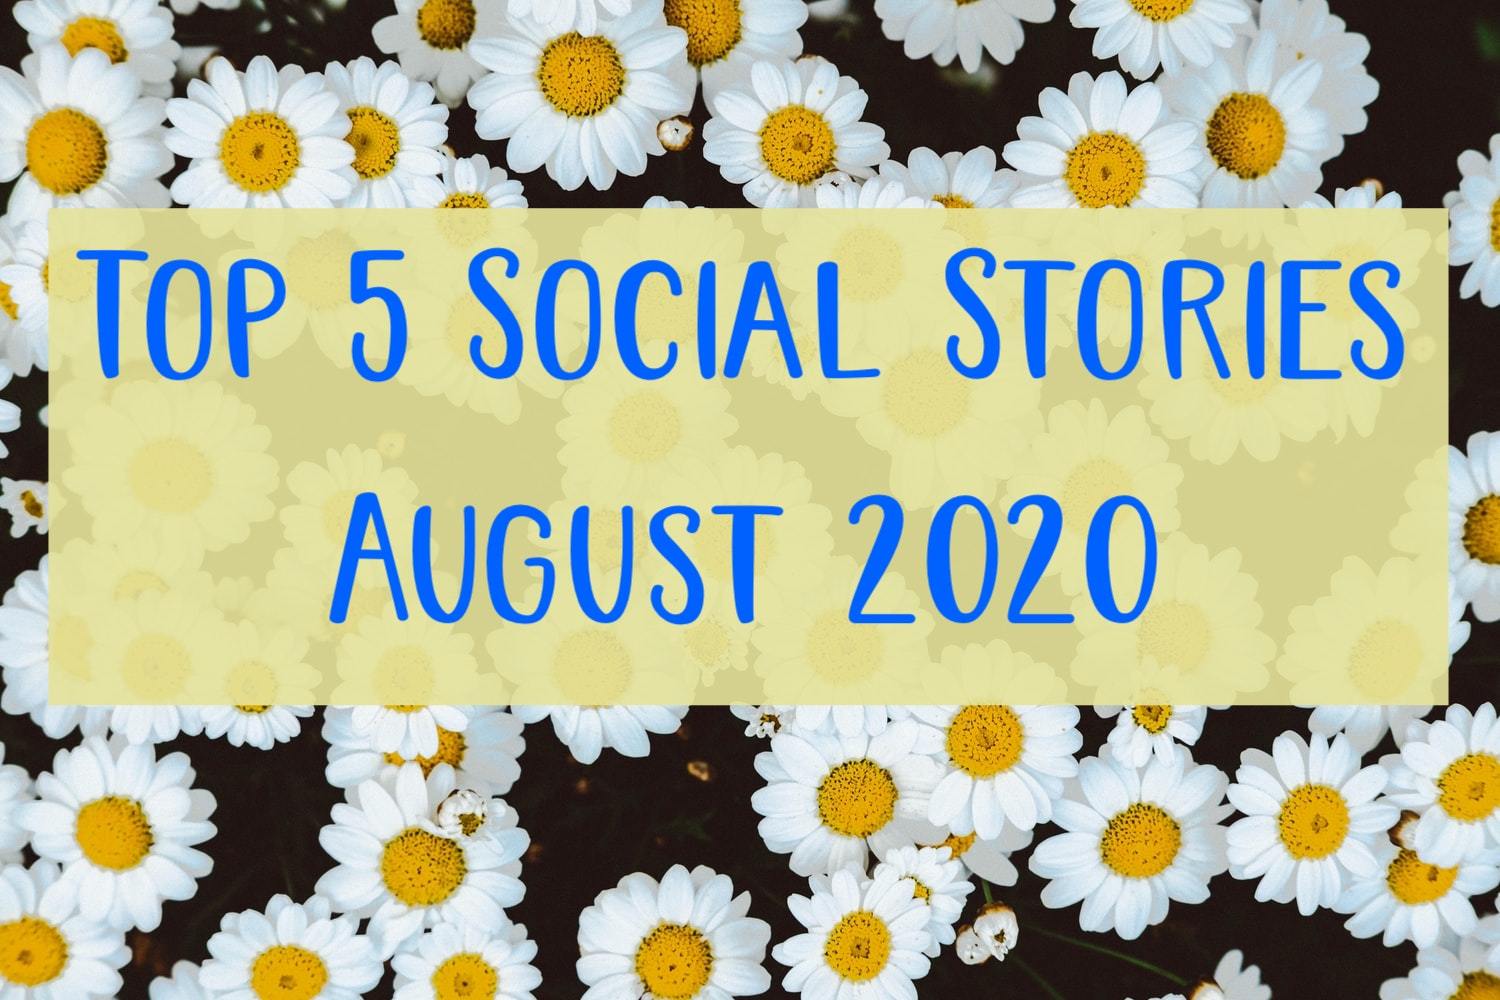 Our Top 5 Social Stories for August 2020 | Social Stories Club